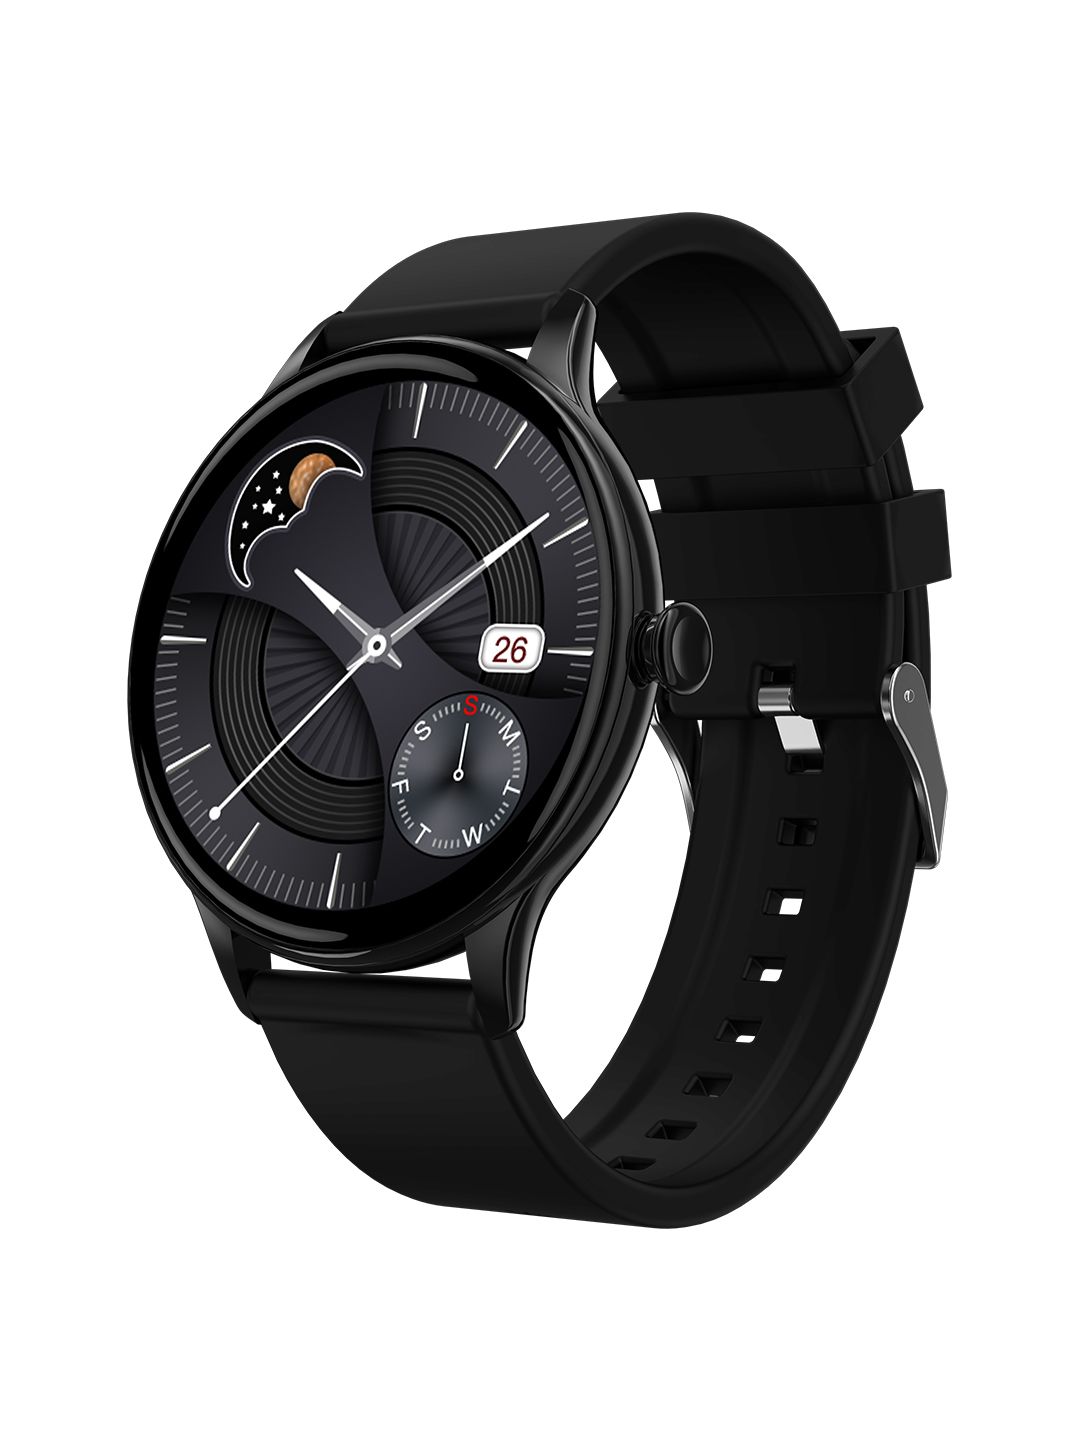 Fire-Boltt Unisex Black Terra AMOLED Always ON Full Touch Screen Smartwatch 19BSWAAY#1 Price in India